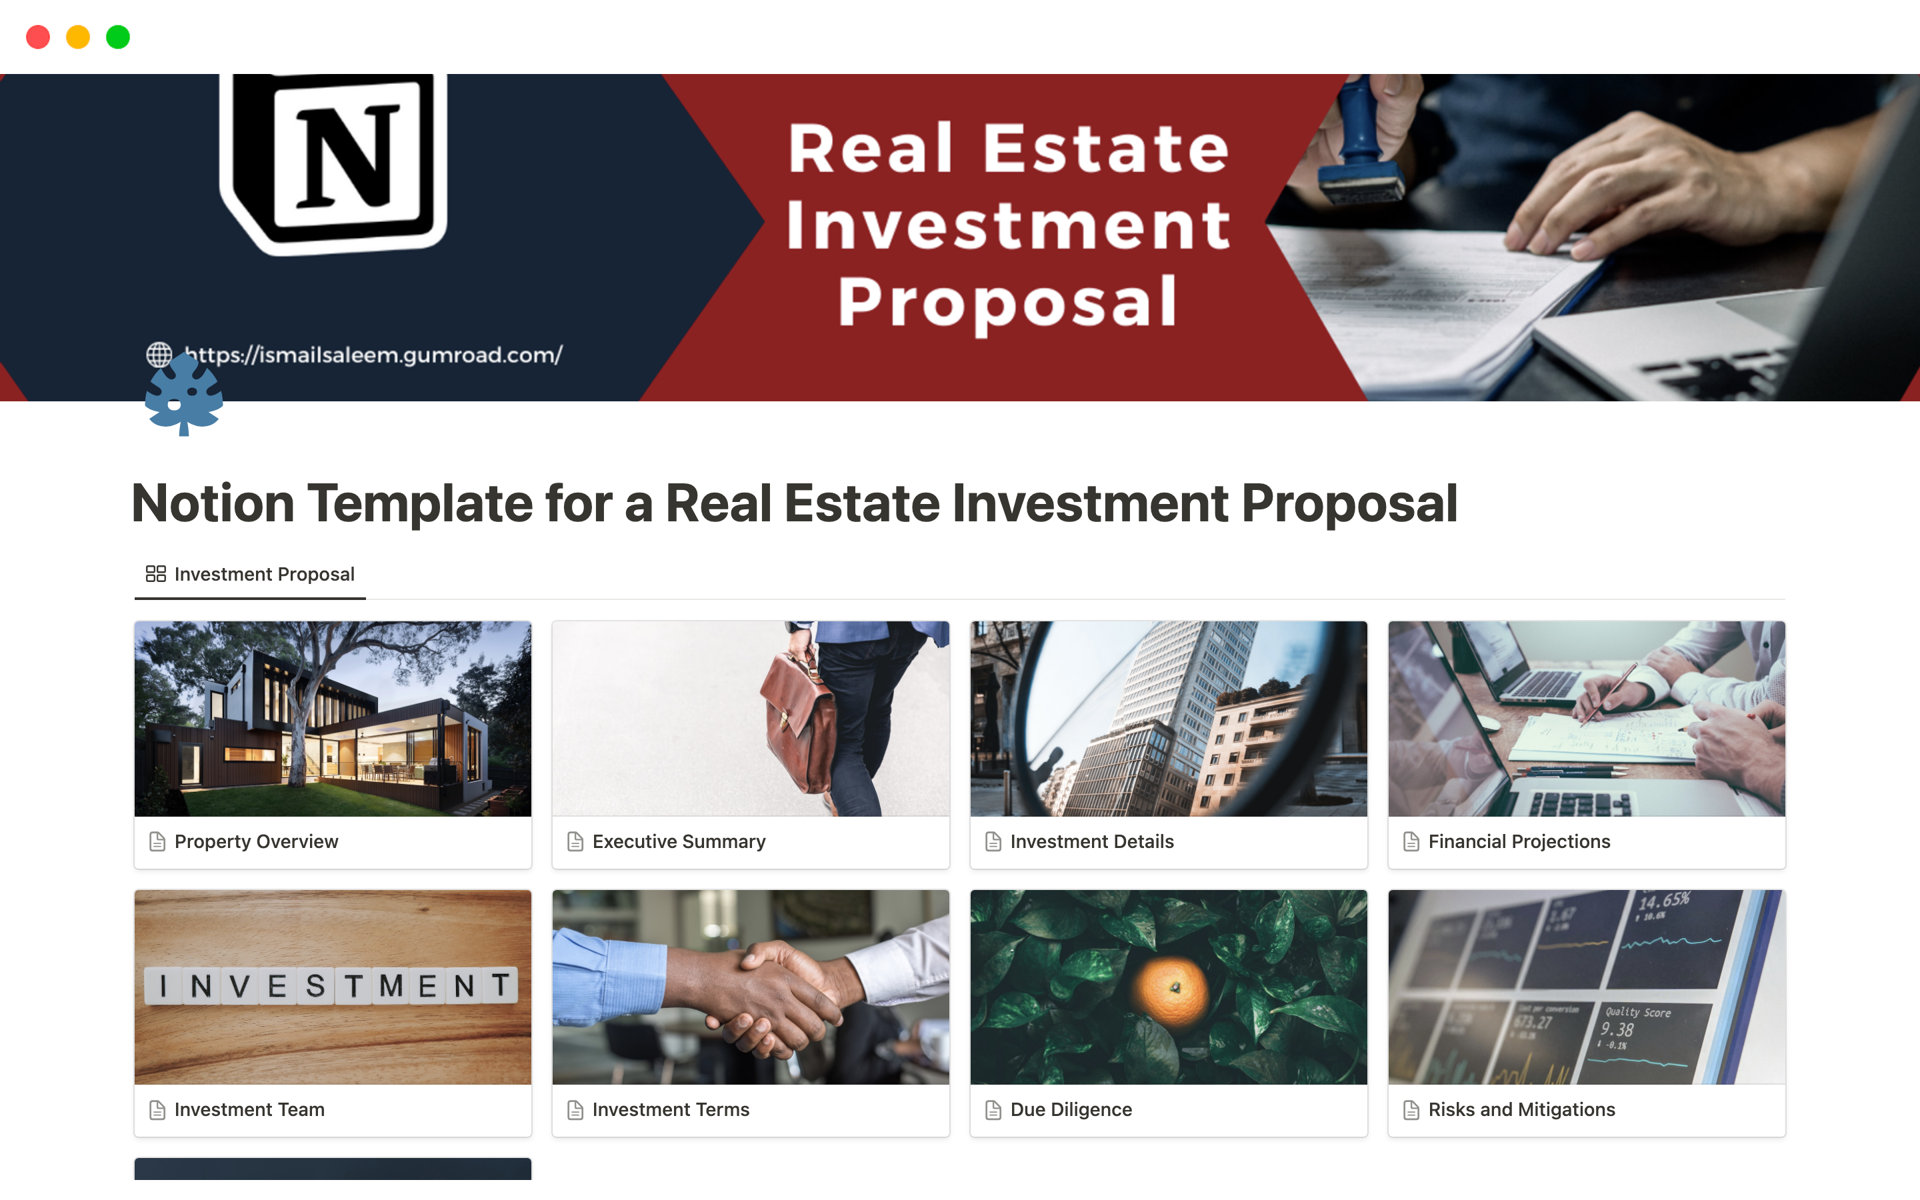 Unlock your potential as a real estate investor with our "Notion Template for a Real Estate Investment Proposal." This comprehensive and professionally designed template empowers you to create compelling and persuasive investment proposals with ease.